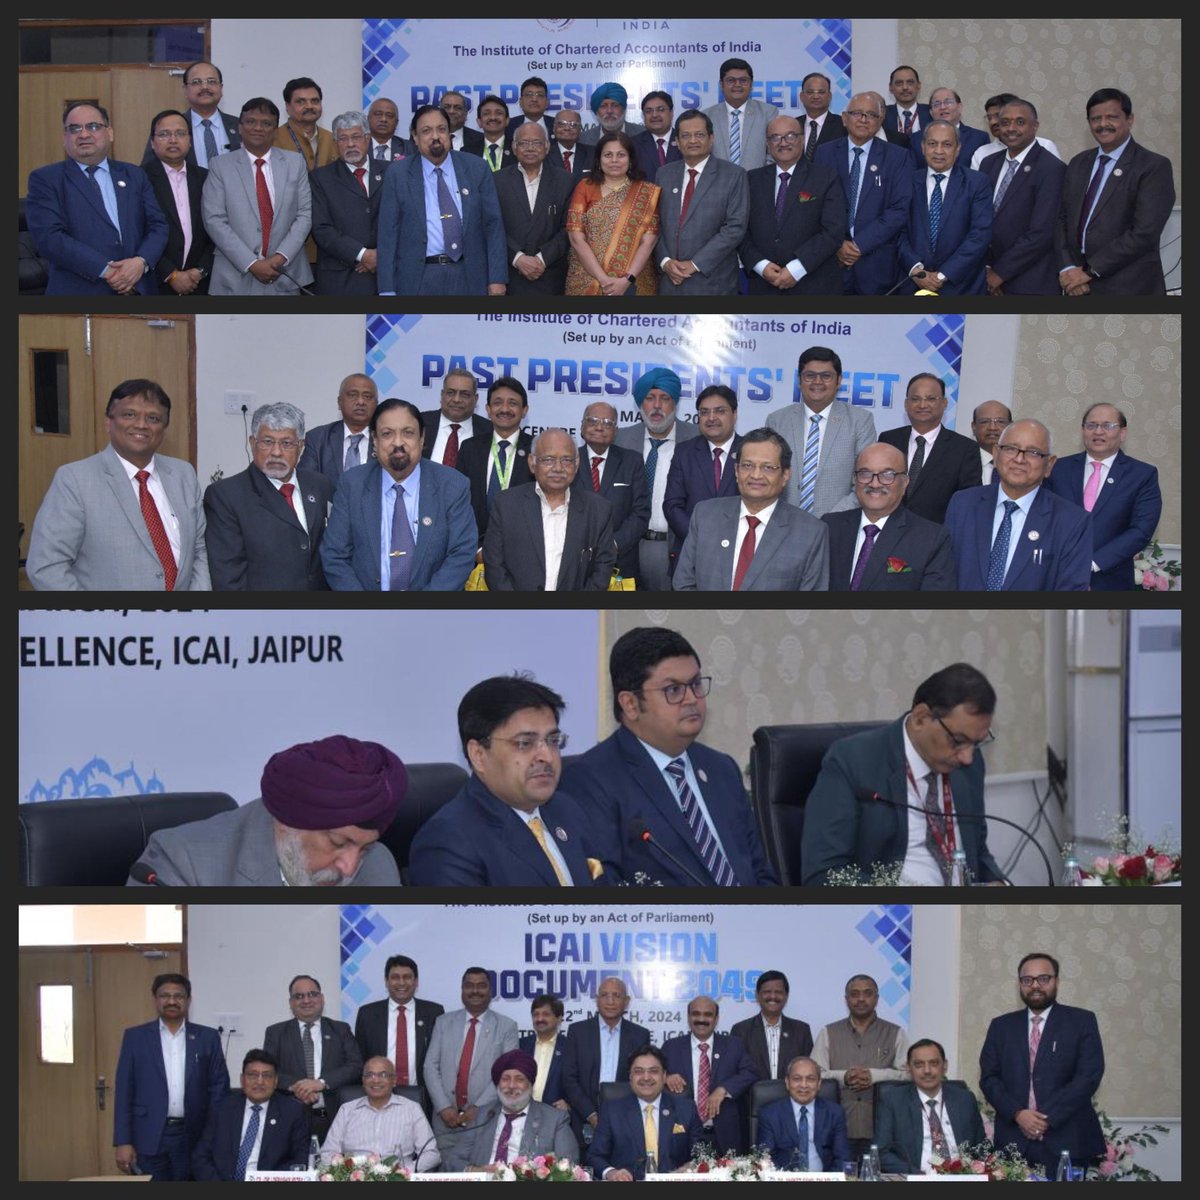 CA. Ranjeet K. Agarwal, President & CA. Charanjot S. Nanda, Vice President with Past Presidents, Govt Nominees, Central Council Members & Secretary at Meeting of ICAI Vision Document 2049 held at Centre of Excellence, Jaipur on 21st and 22nd March 2024 #ICAIat75 #DRISHTI